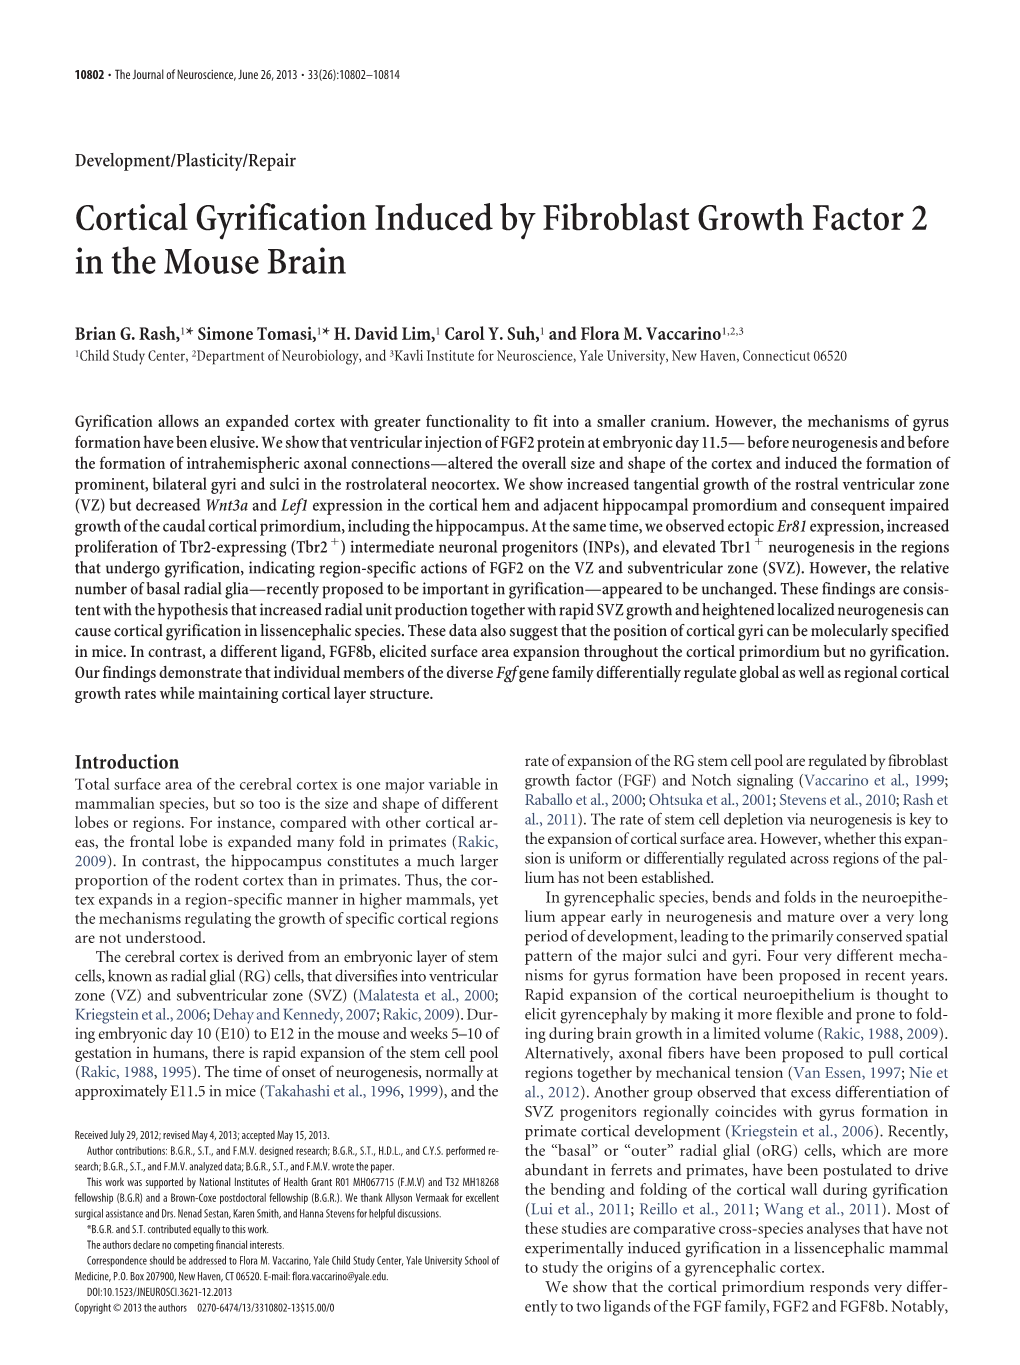 Cortical Gyrification Induced by Fibroblast Growth Factor 2 in the Mouse Brain